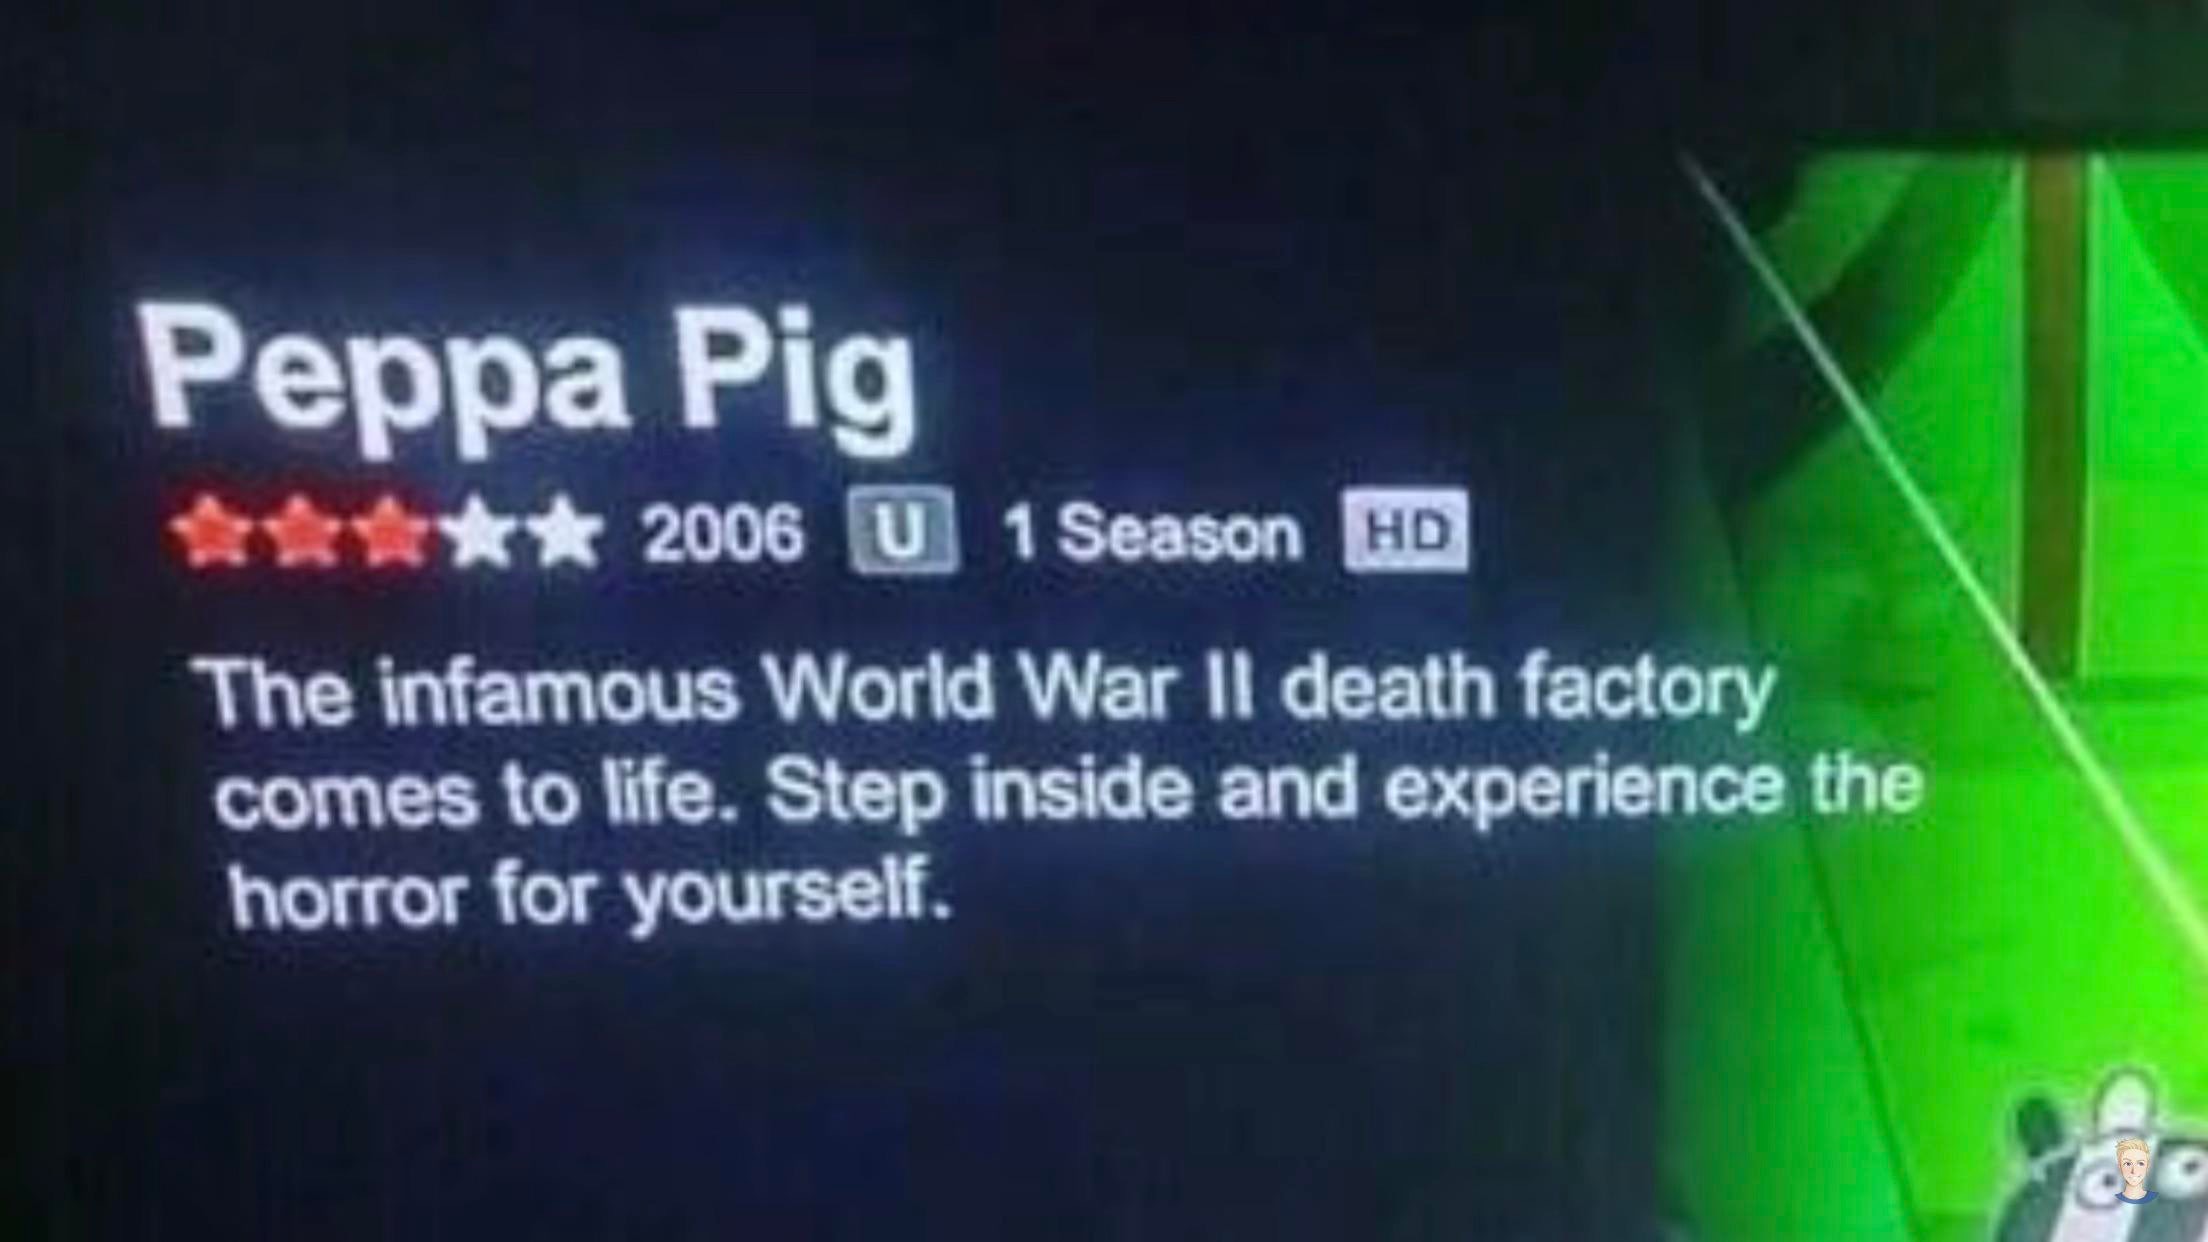 netflix peppa pig death factory - Peppa Pig 2006 U 1 Season Hd The infamous World War Ii death factory comes to life. Step inside and experience the horror for yourself.